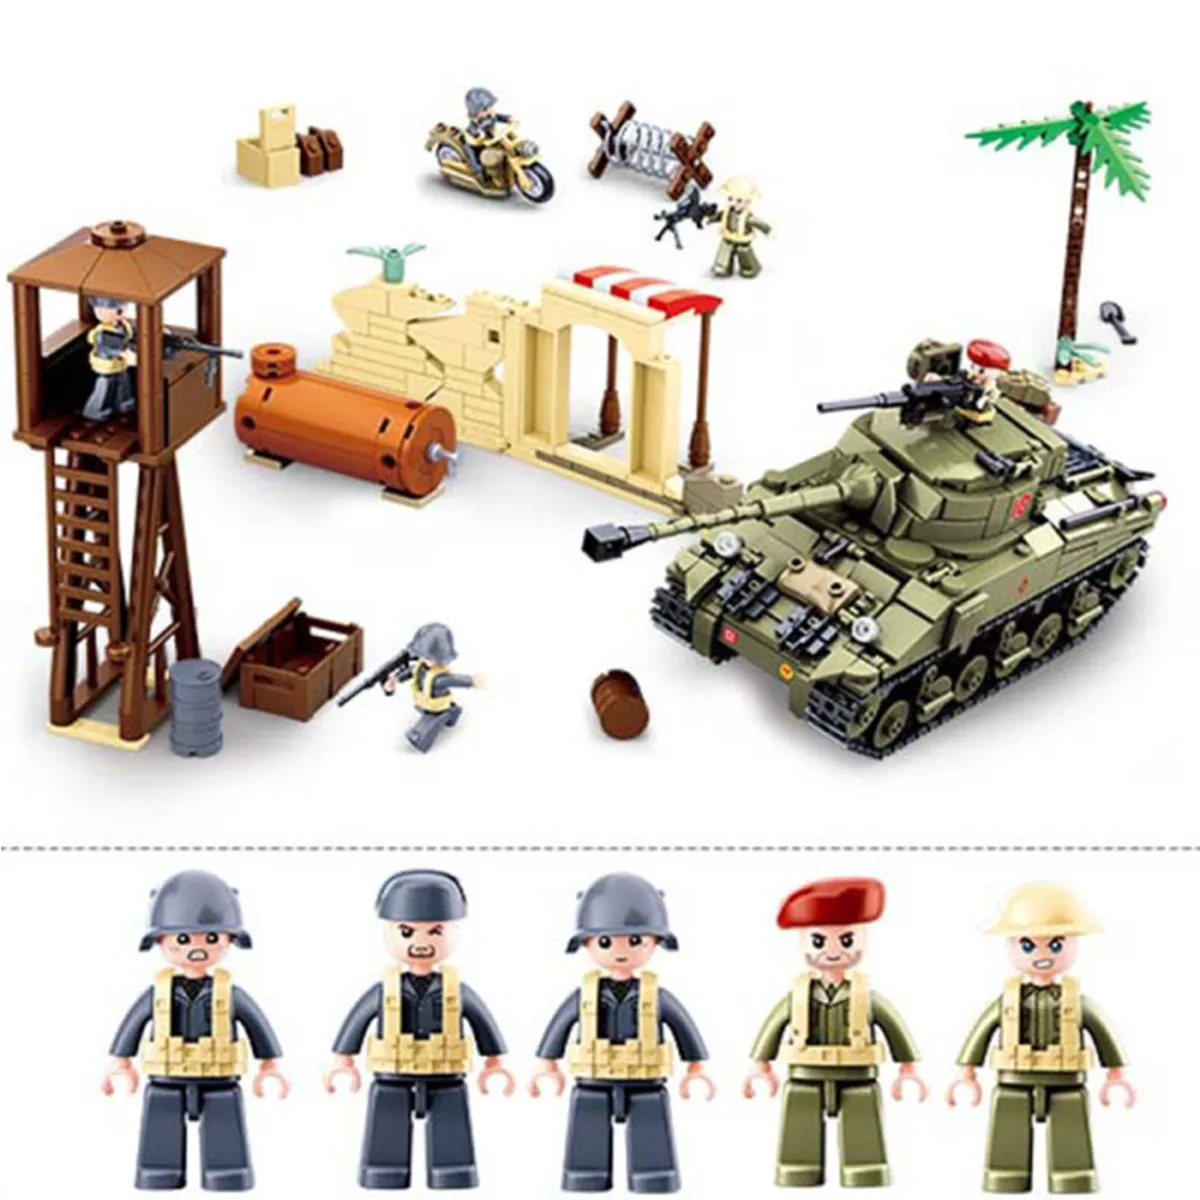 Sluban Building Block Toys WWⅡ B0713 The Battle of Ei Alamein 790PCS Bricks  Army Tanks Military Set Fit With Leading Brands - LEPIN LEPIN Store